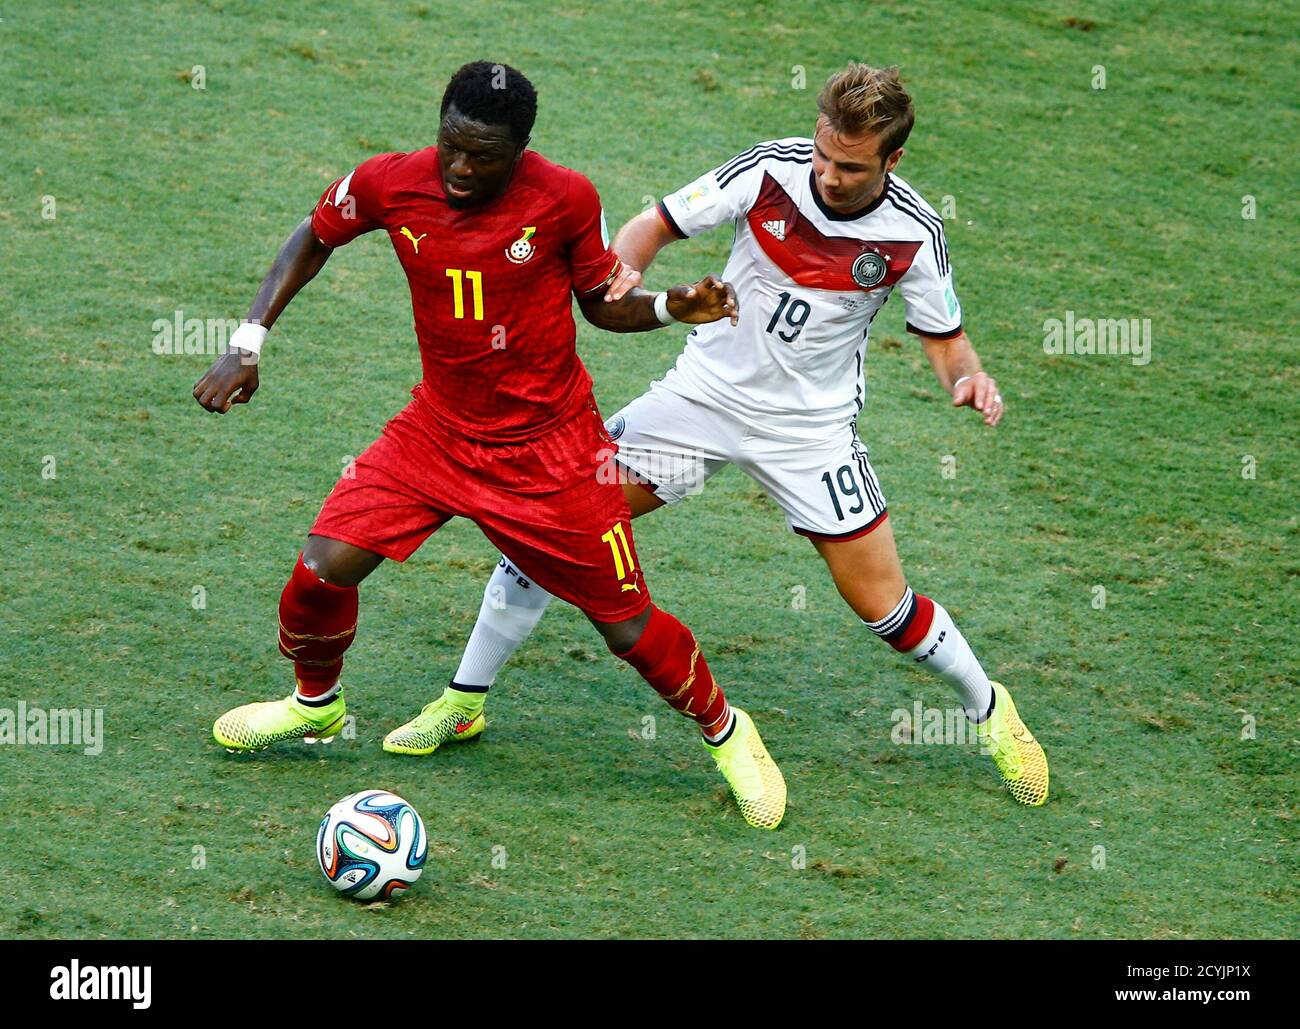 Ghana's Sulley Muntari is challenged for the ball by Germany's Mario Goetze (R) during their 2014 World Cup Group G soccer match at the Castelao arena in Fortaleza June 21, 2014. REUTERS/Mike Blake (BRAZIL  - Tags: SOCCER SPORT WORLD CUP) Stock Photo